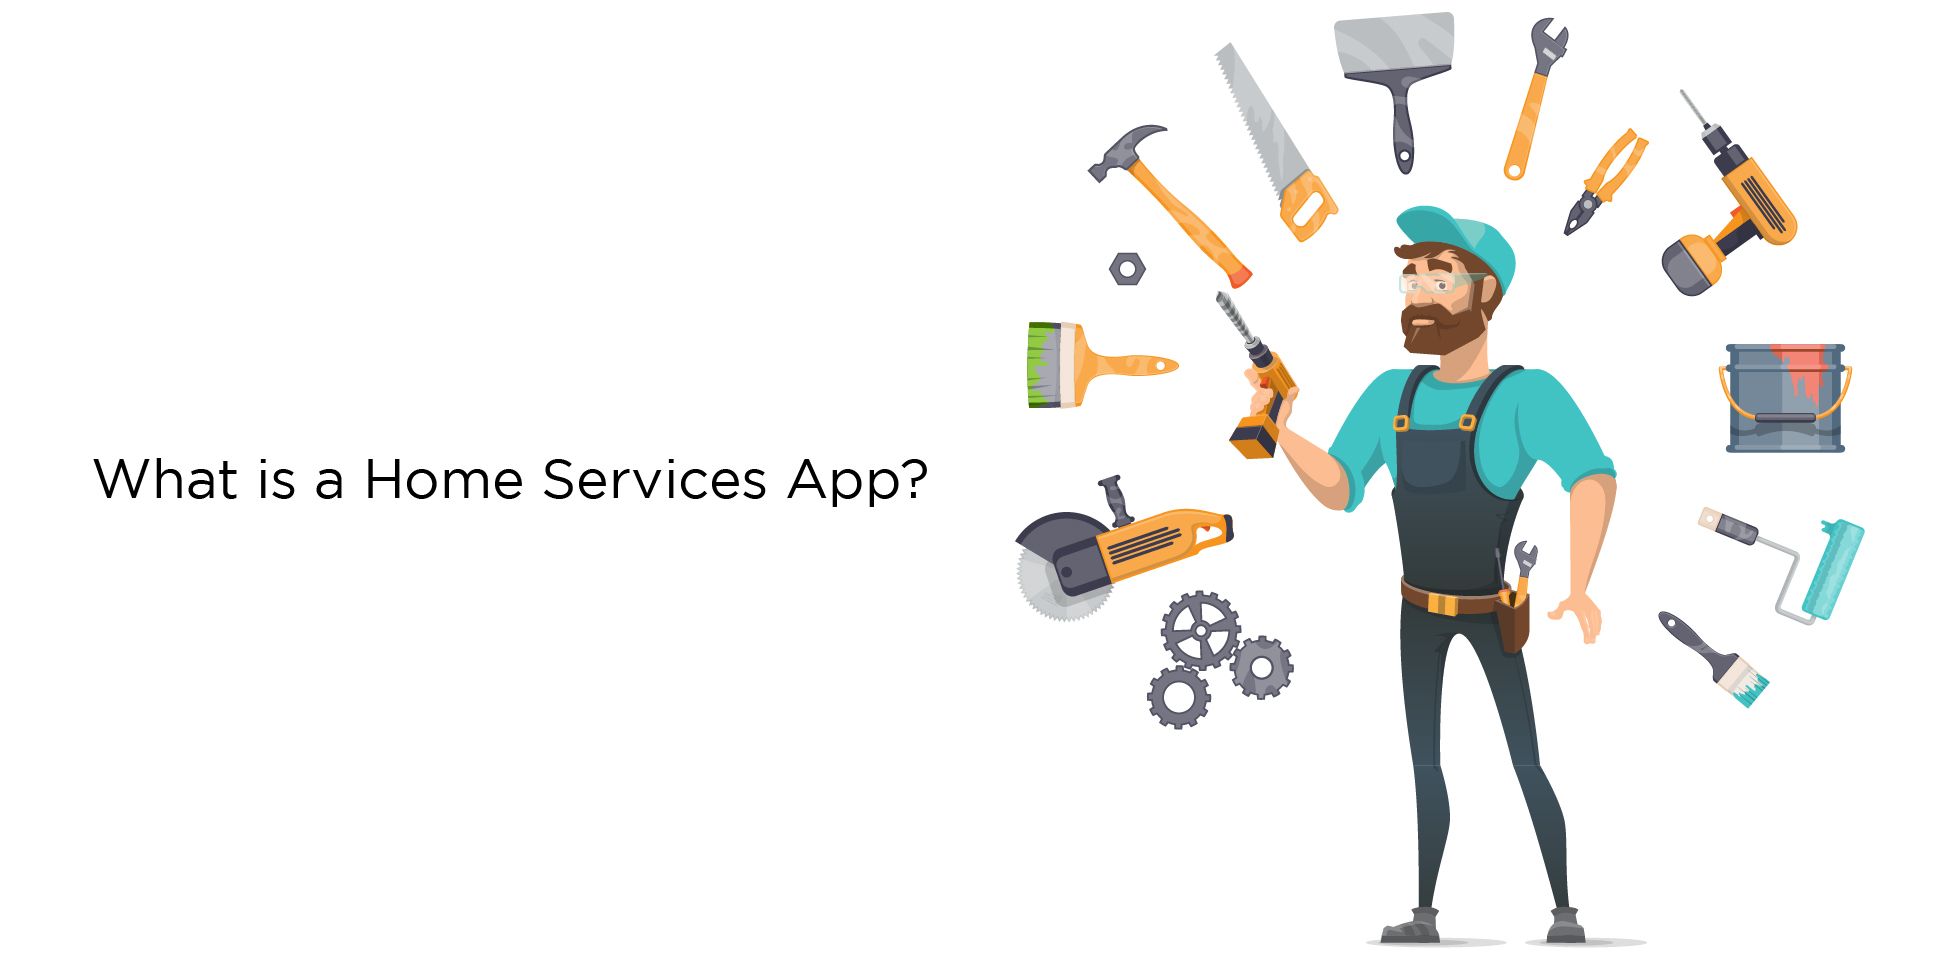 What is a Home Services App